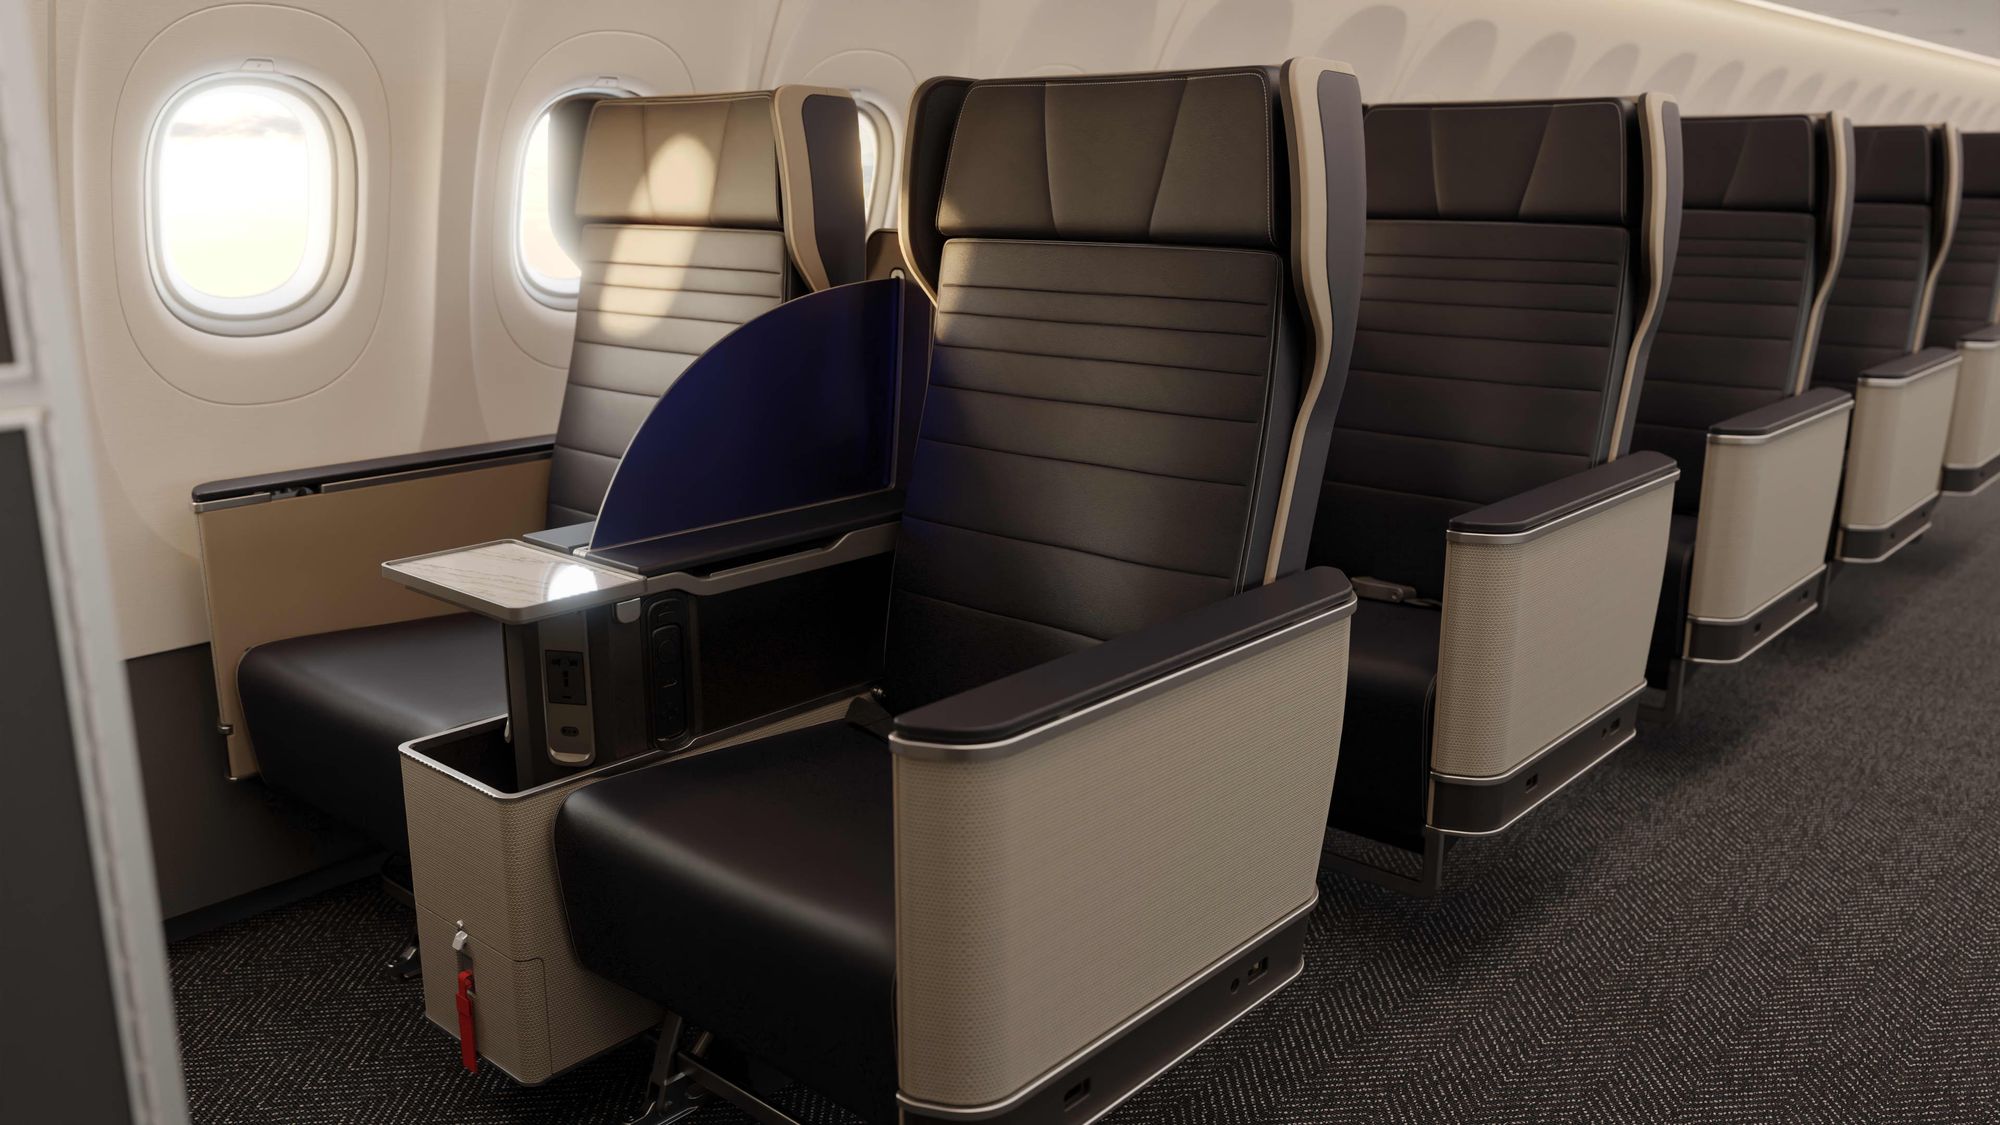                      United Debuts New First Class Seat - And I Don’t Like It                             
                     